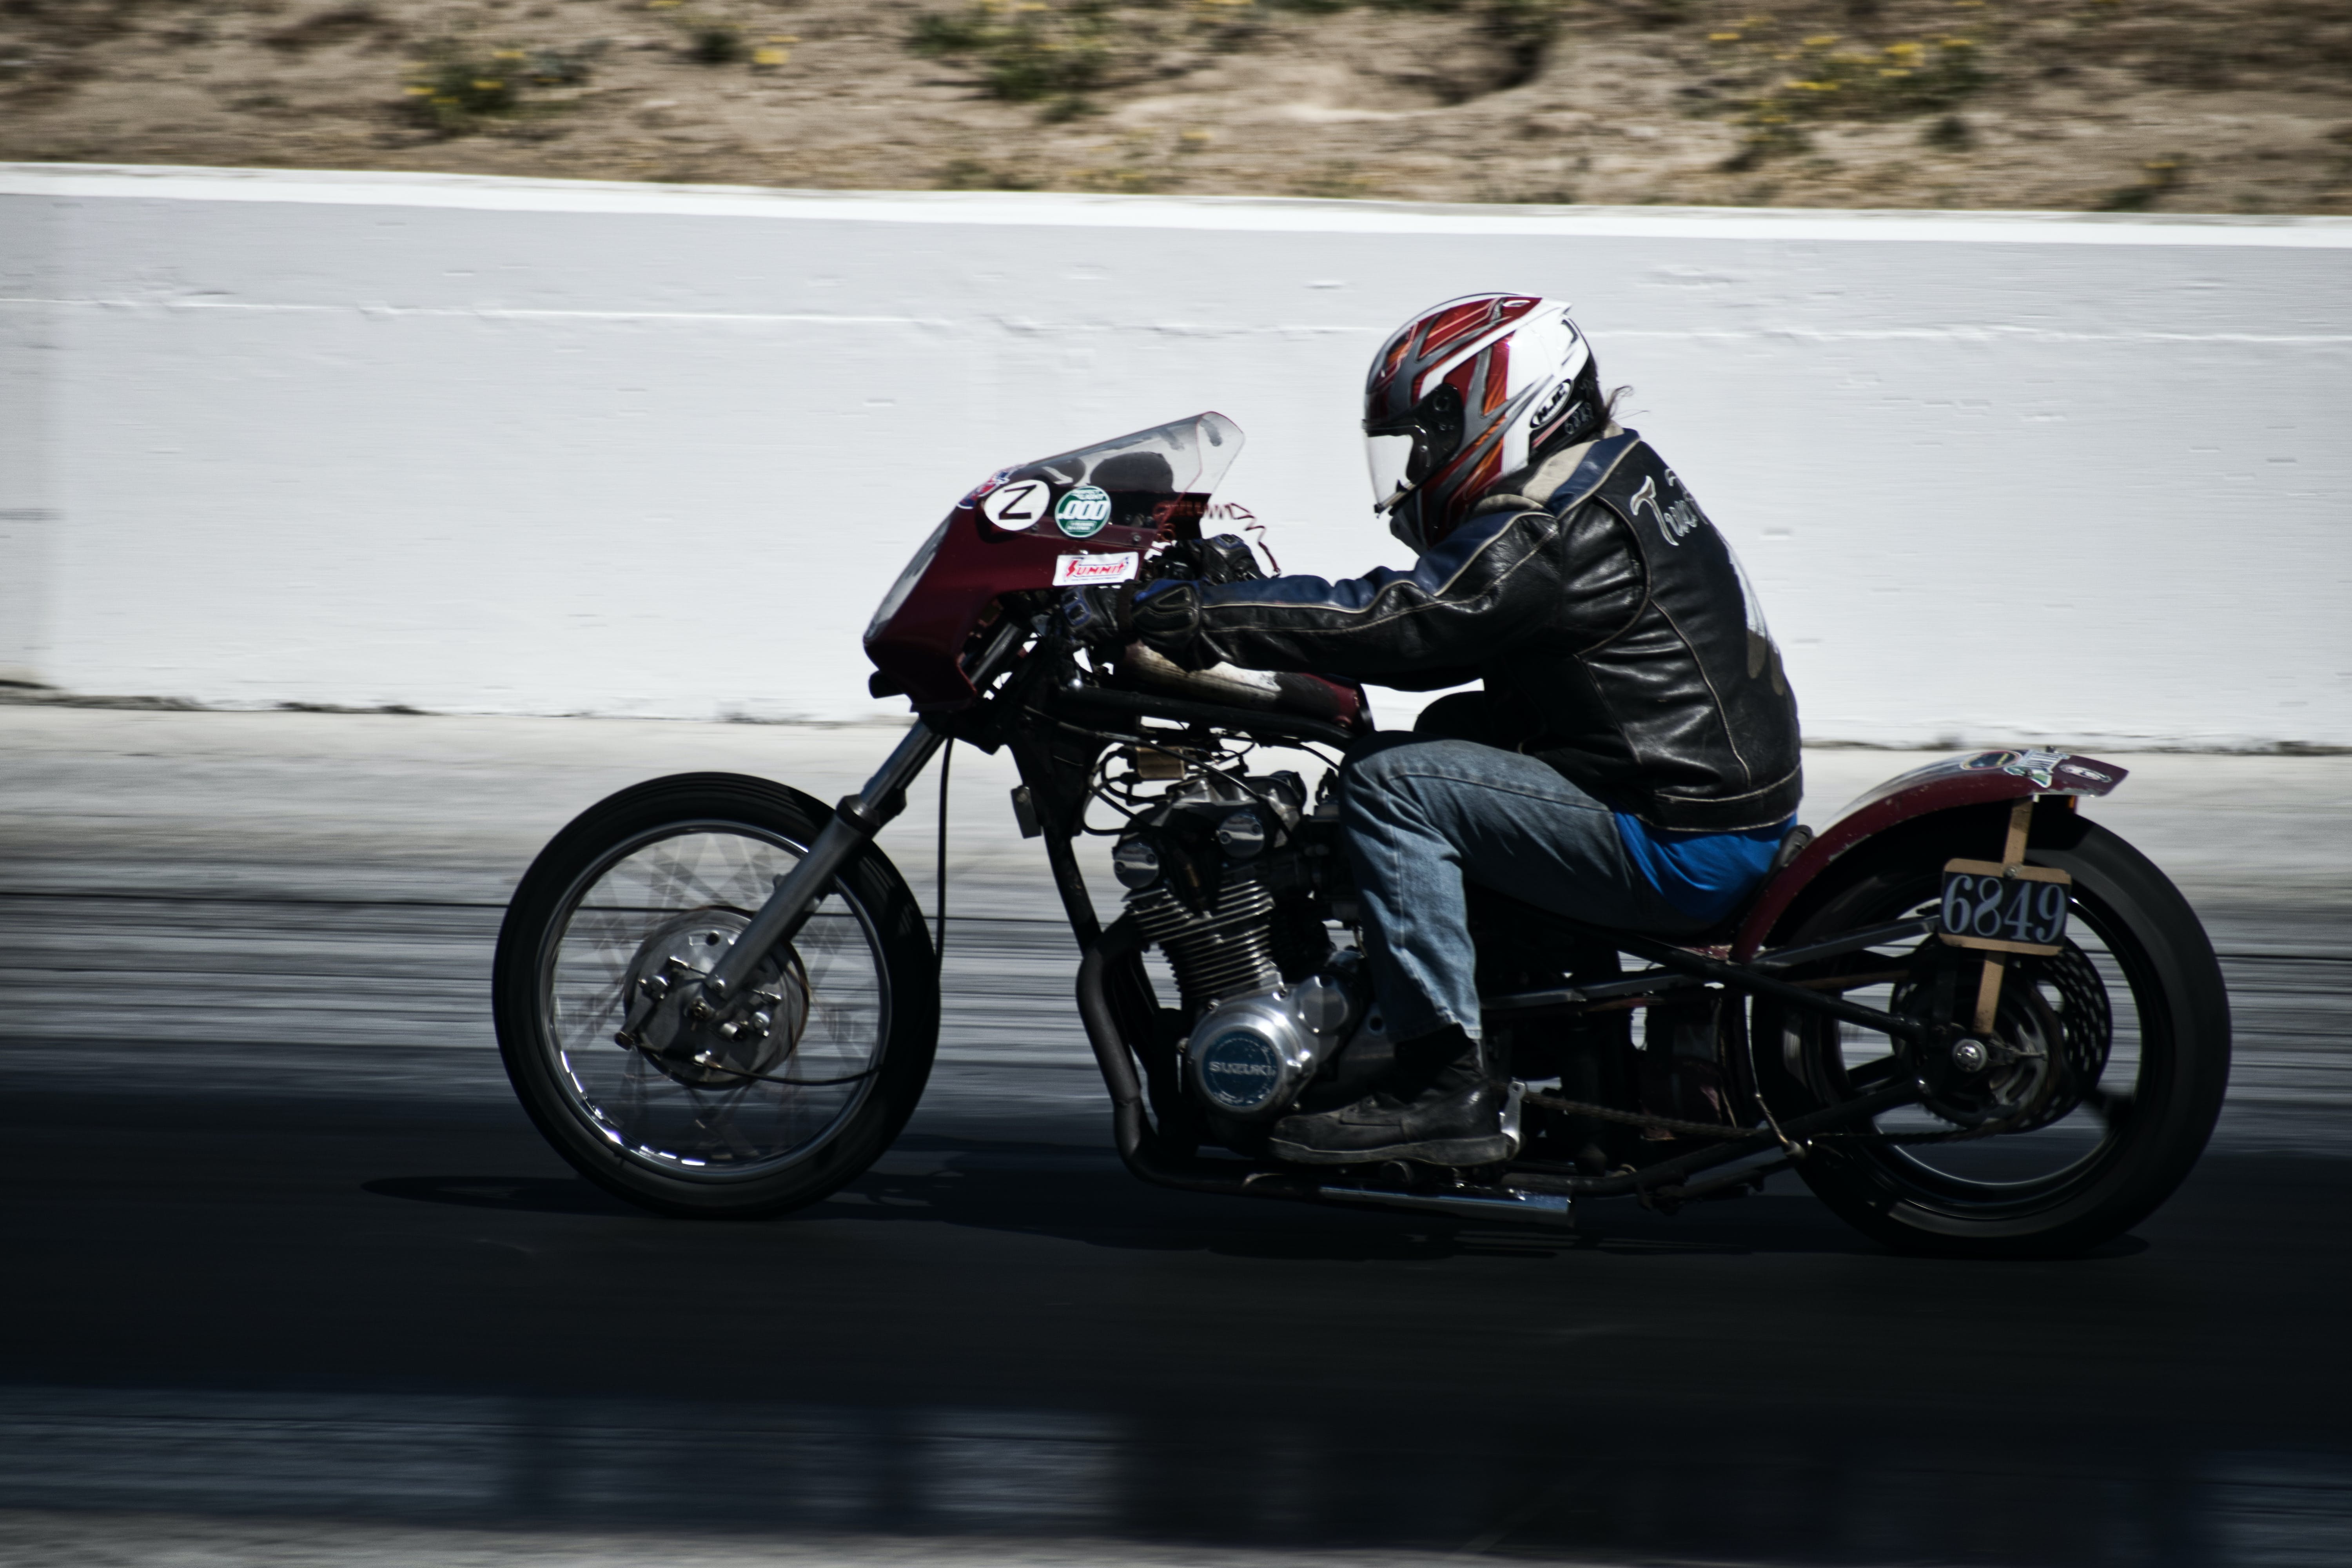 5 Reasons Every Motorcycle Rider Should Take a Safety Course